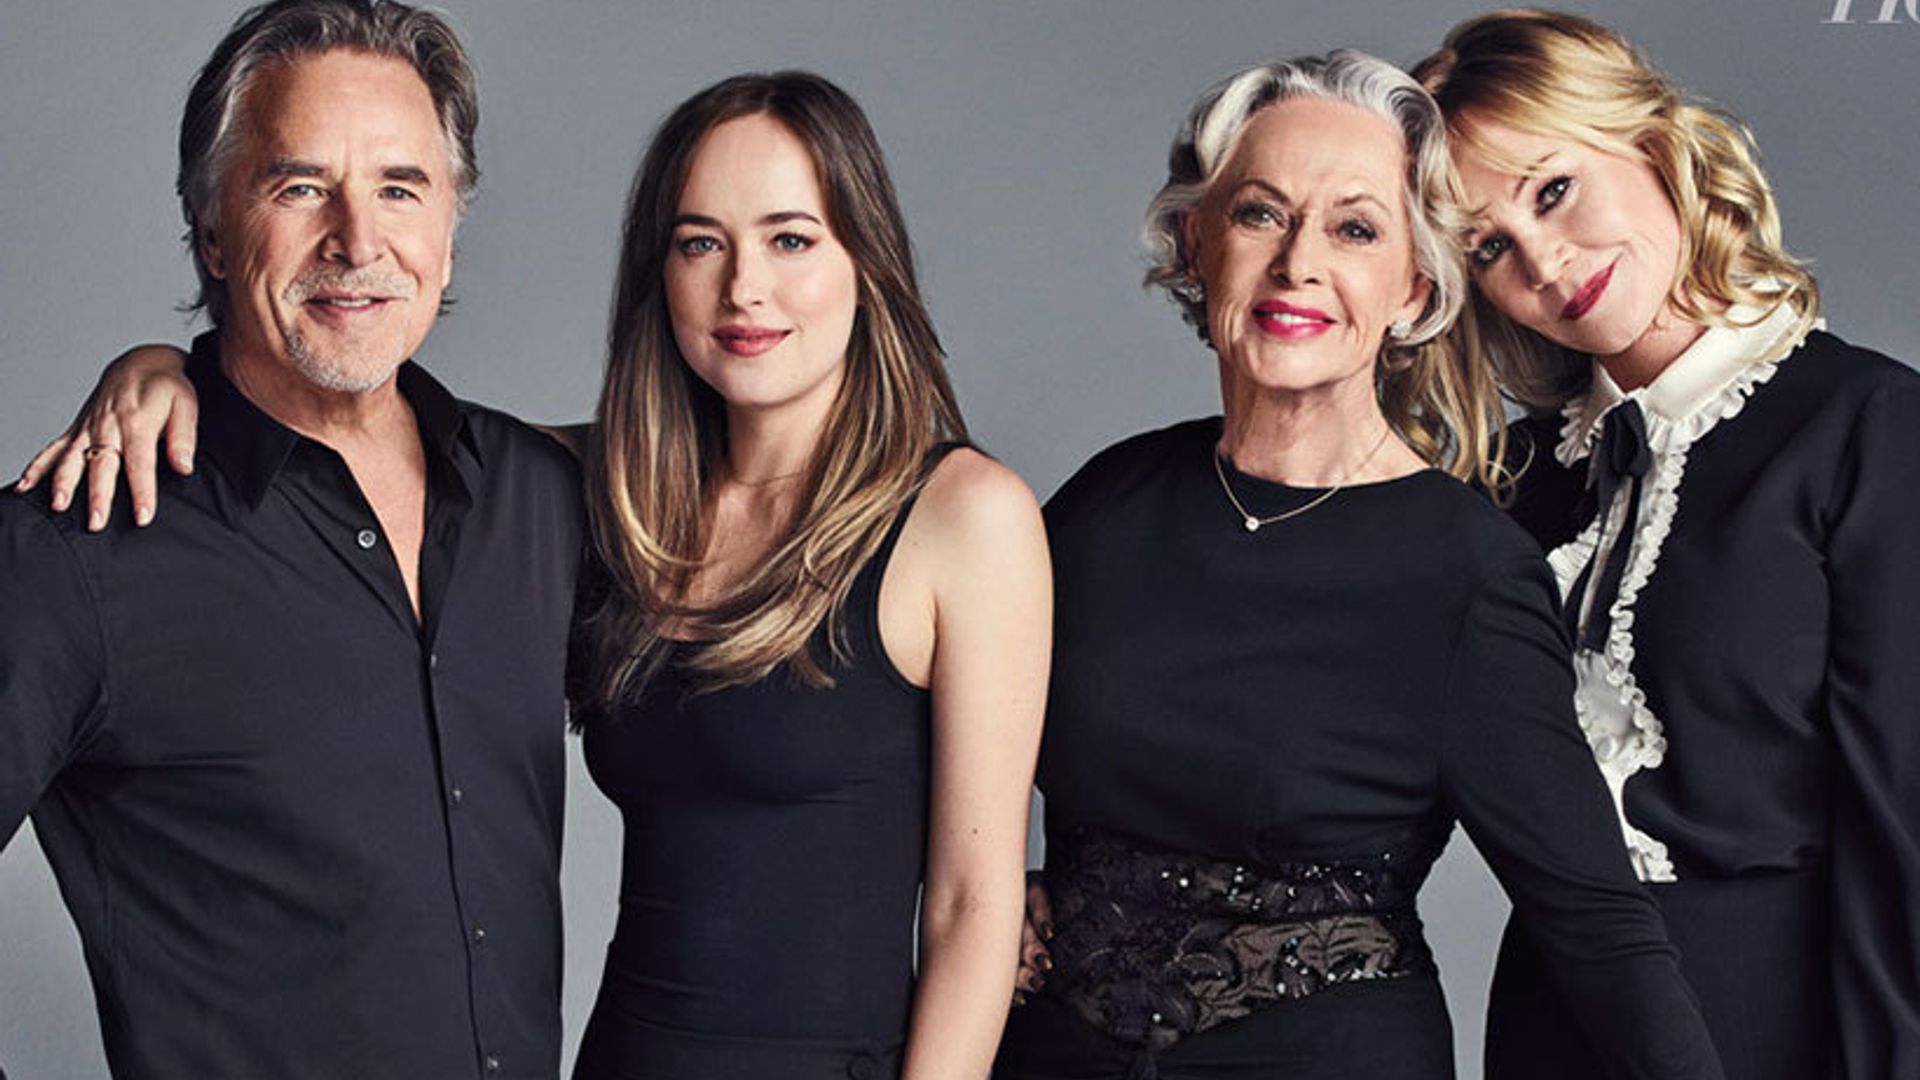 Melanie Griffith and Don Johnson reunite for iconic family photo shoot